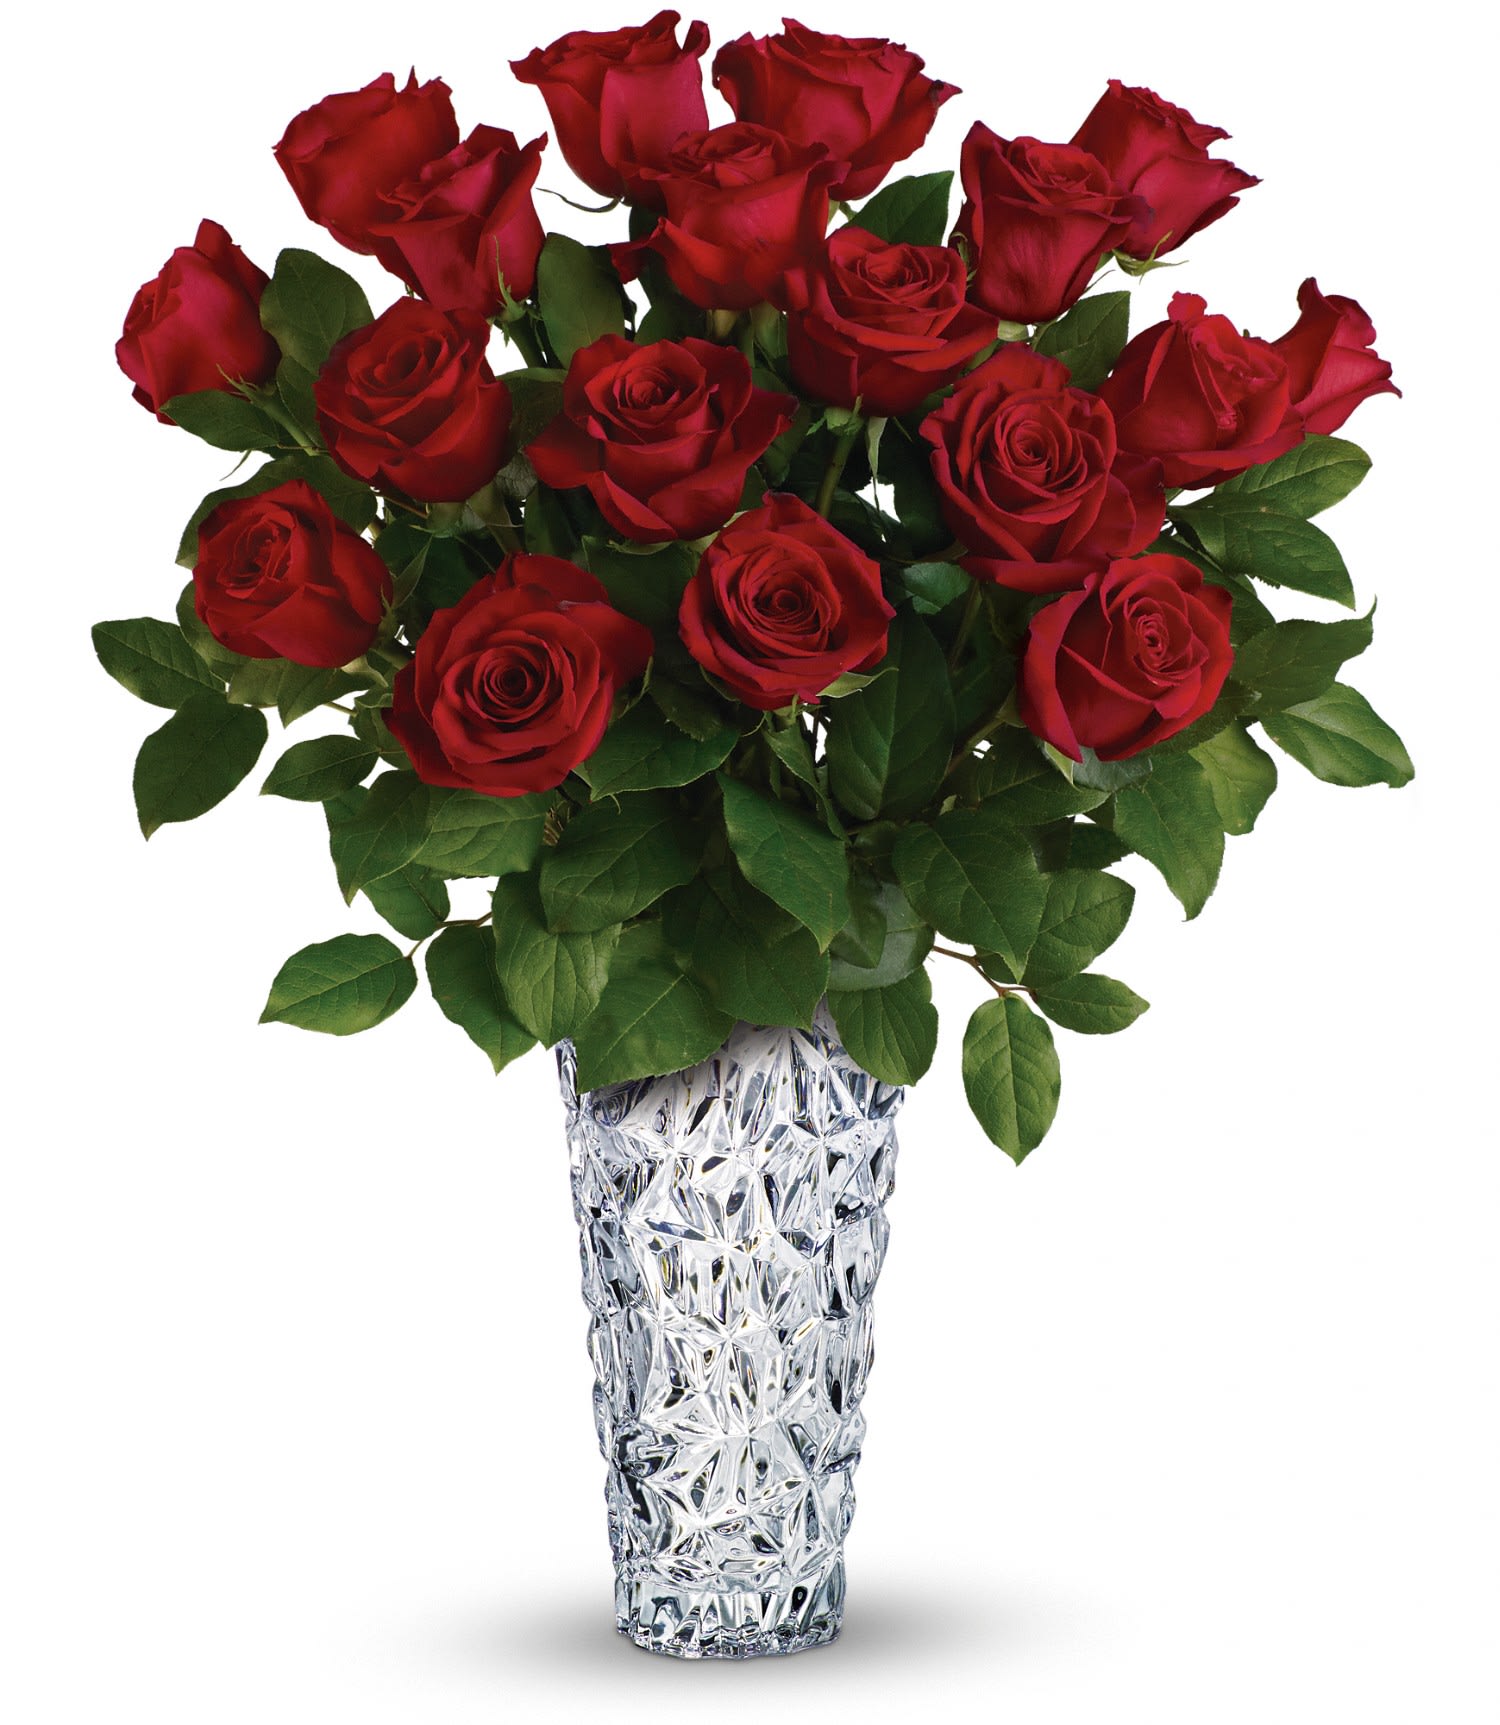 Teleflora's Sparkling Beauty Bouquet DX - Deliver pure passion! This striking bouquet of a dozen and a half, long stem red roses arranged in an exquisite sparkling glass vase is the ultimate gift of love.